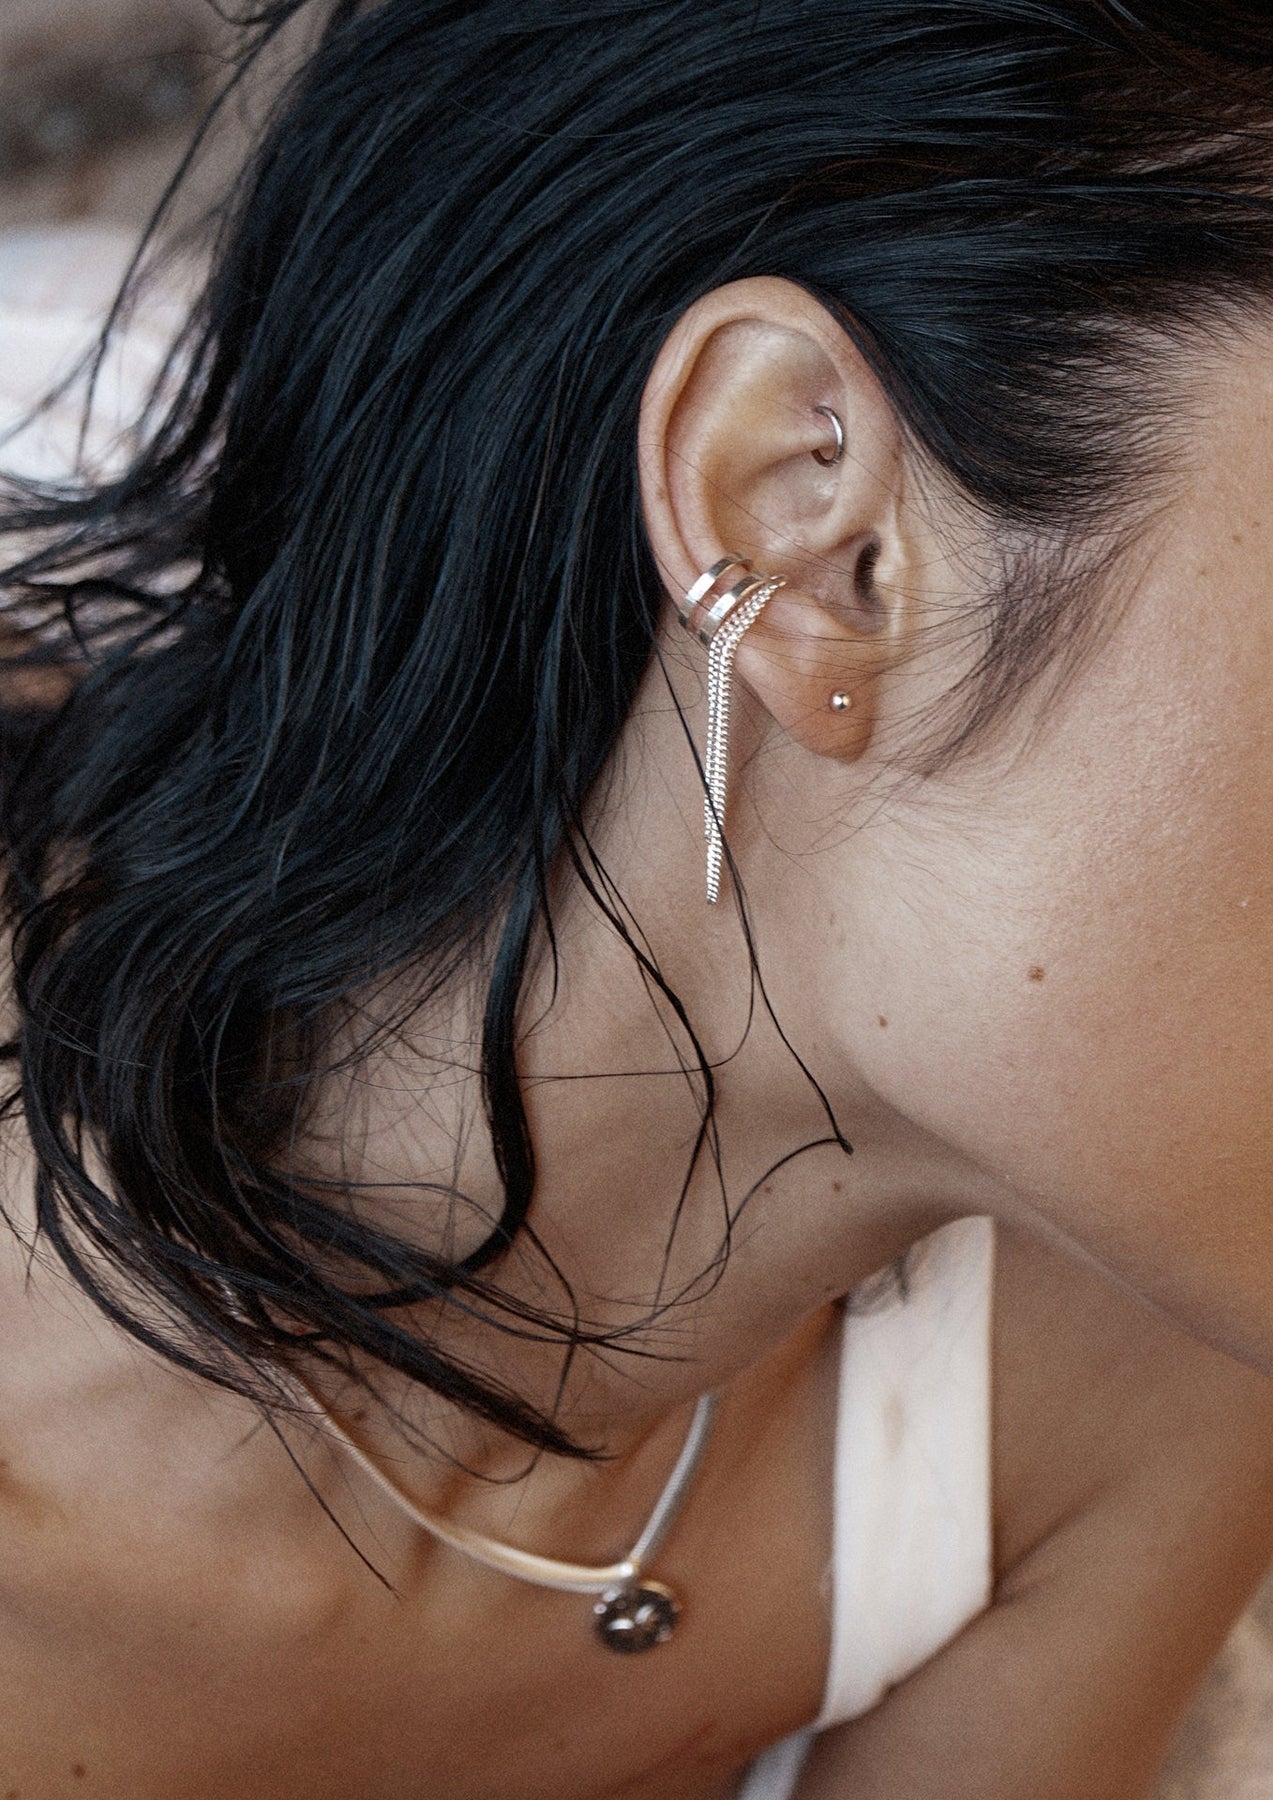 A close-up of a woman wearing the Revolve Ear Cuff in sterling silver, featuring a double chain design. Handcrafted without the need for ear piercings. Dimensions: 1mm thickness, 5.73mm width, 60mm length.